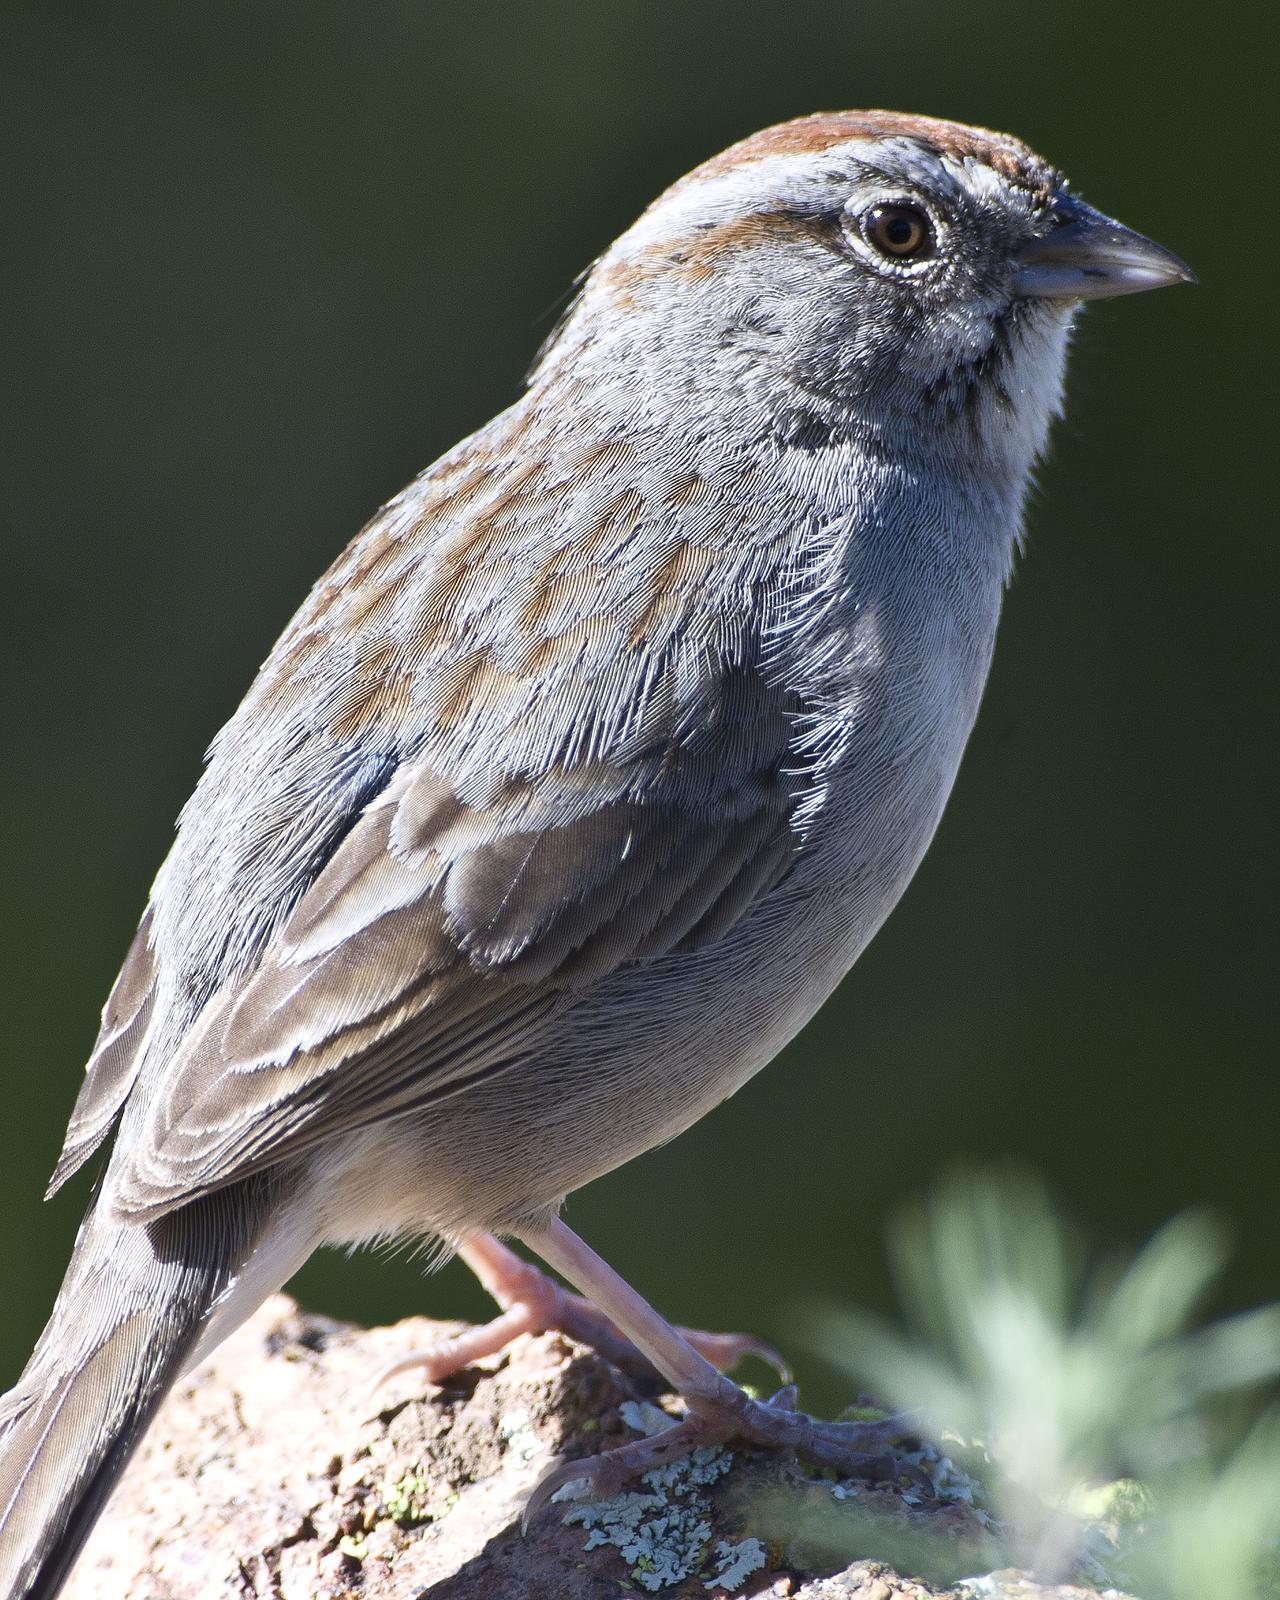 Rufous-crowned Sparrow Photo by Bill Adams